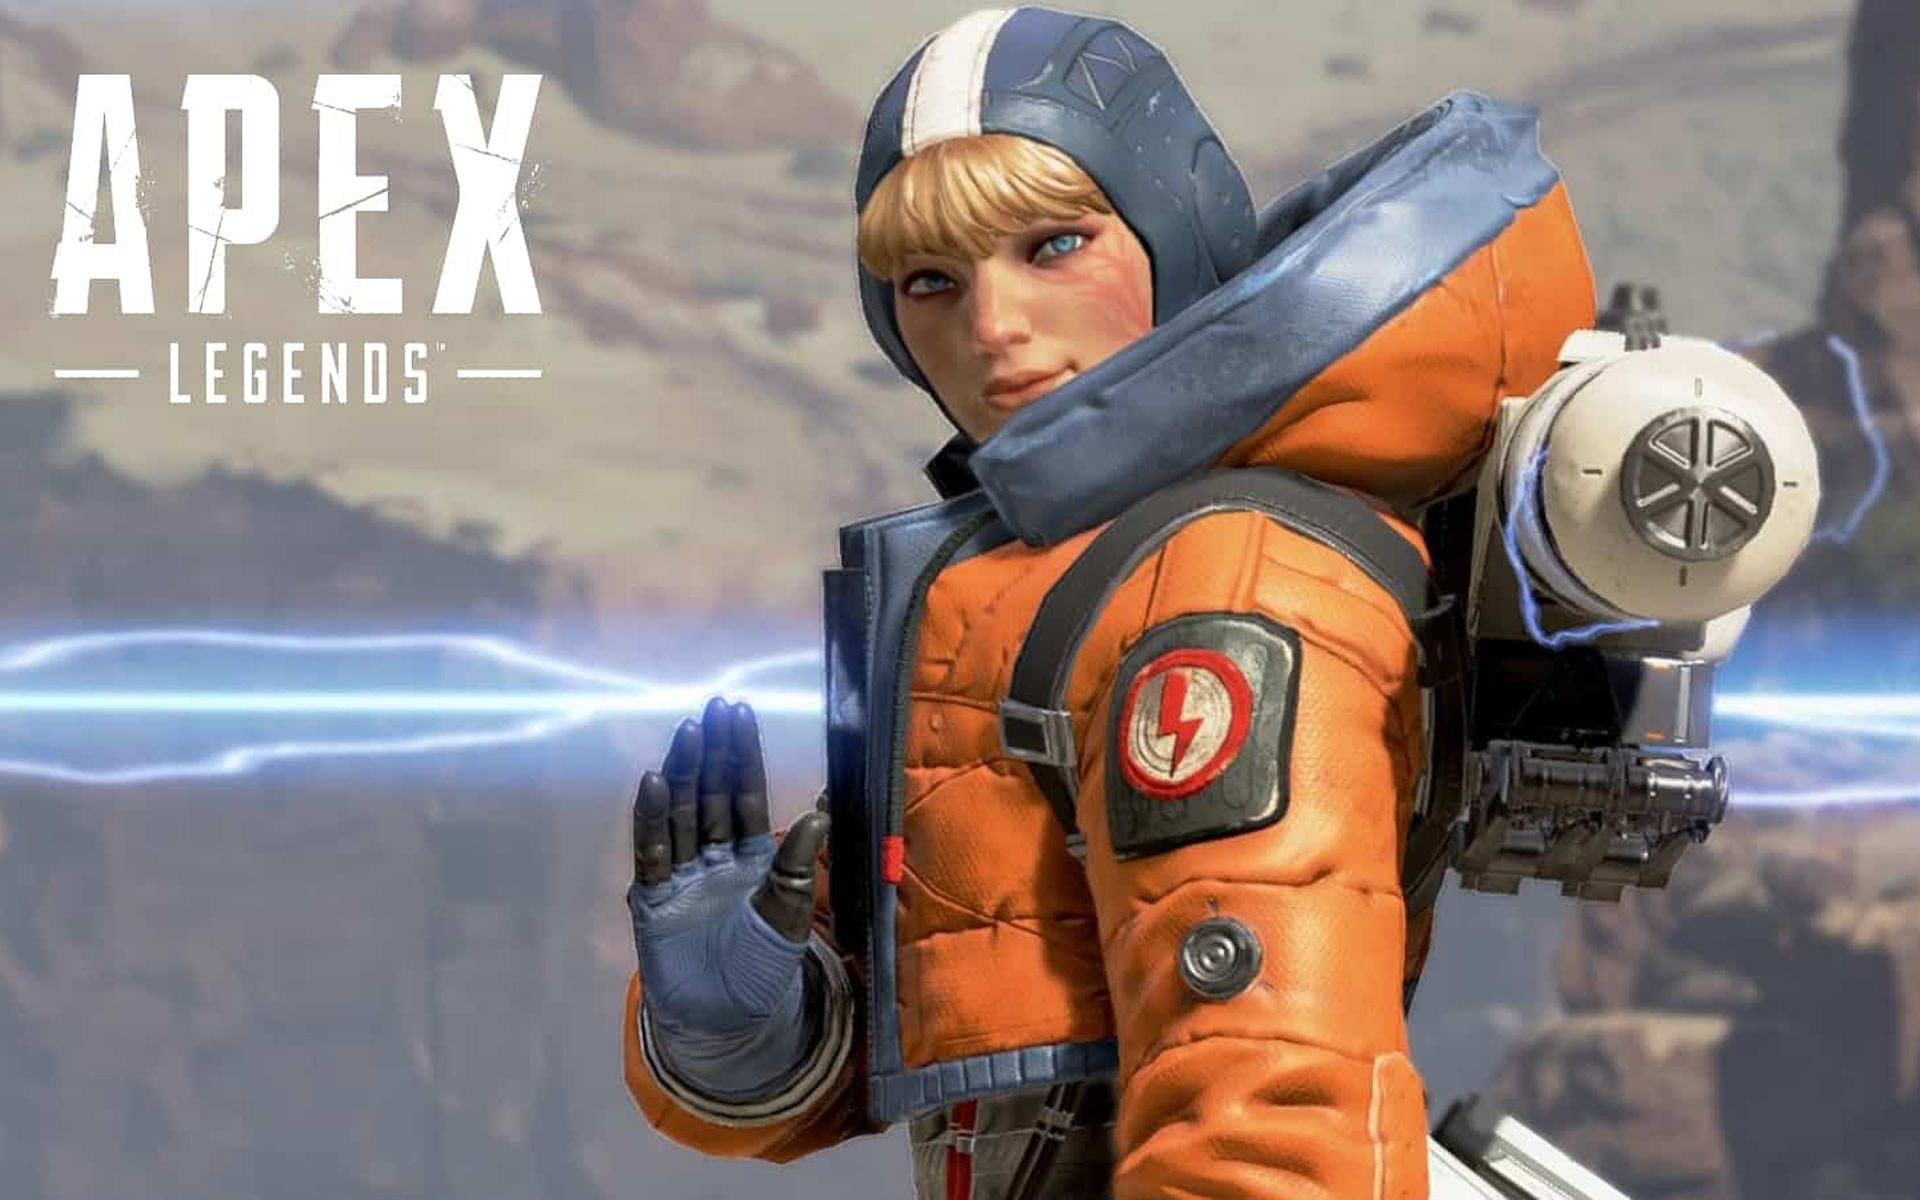 Wattson is one of the best legends for the new Control mode in Apex Legends (Image via Respawn Entertainment)